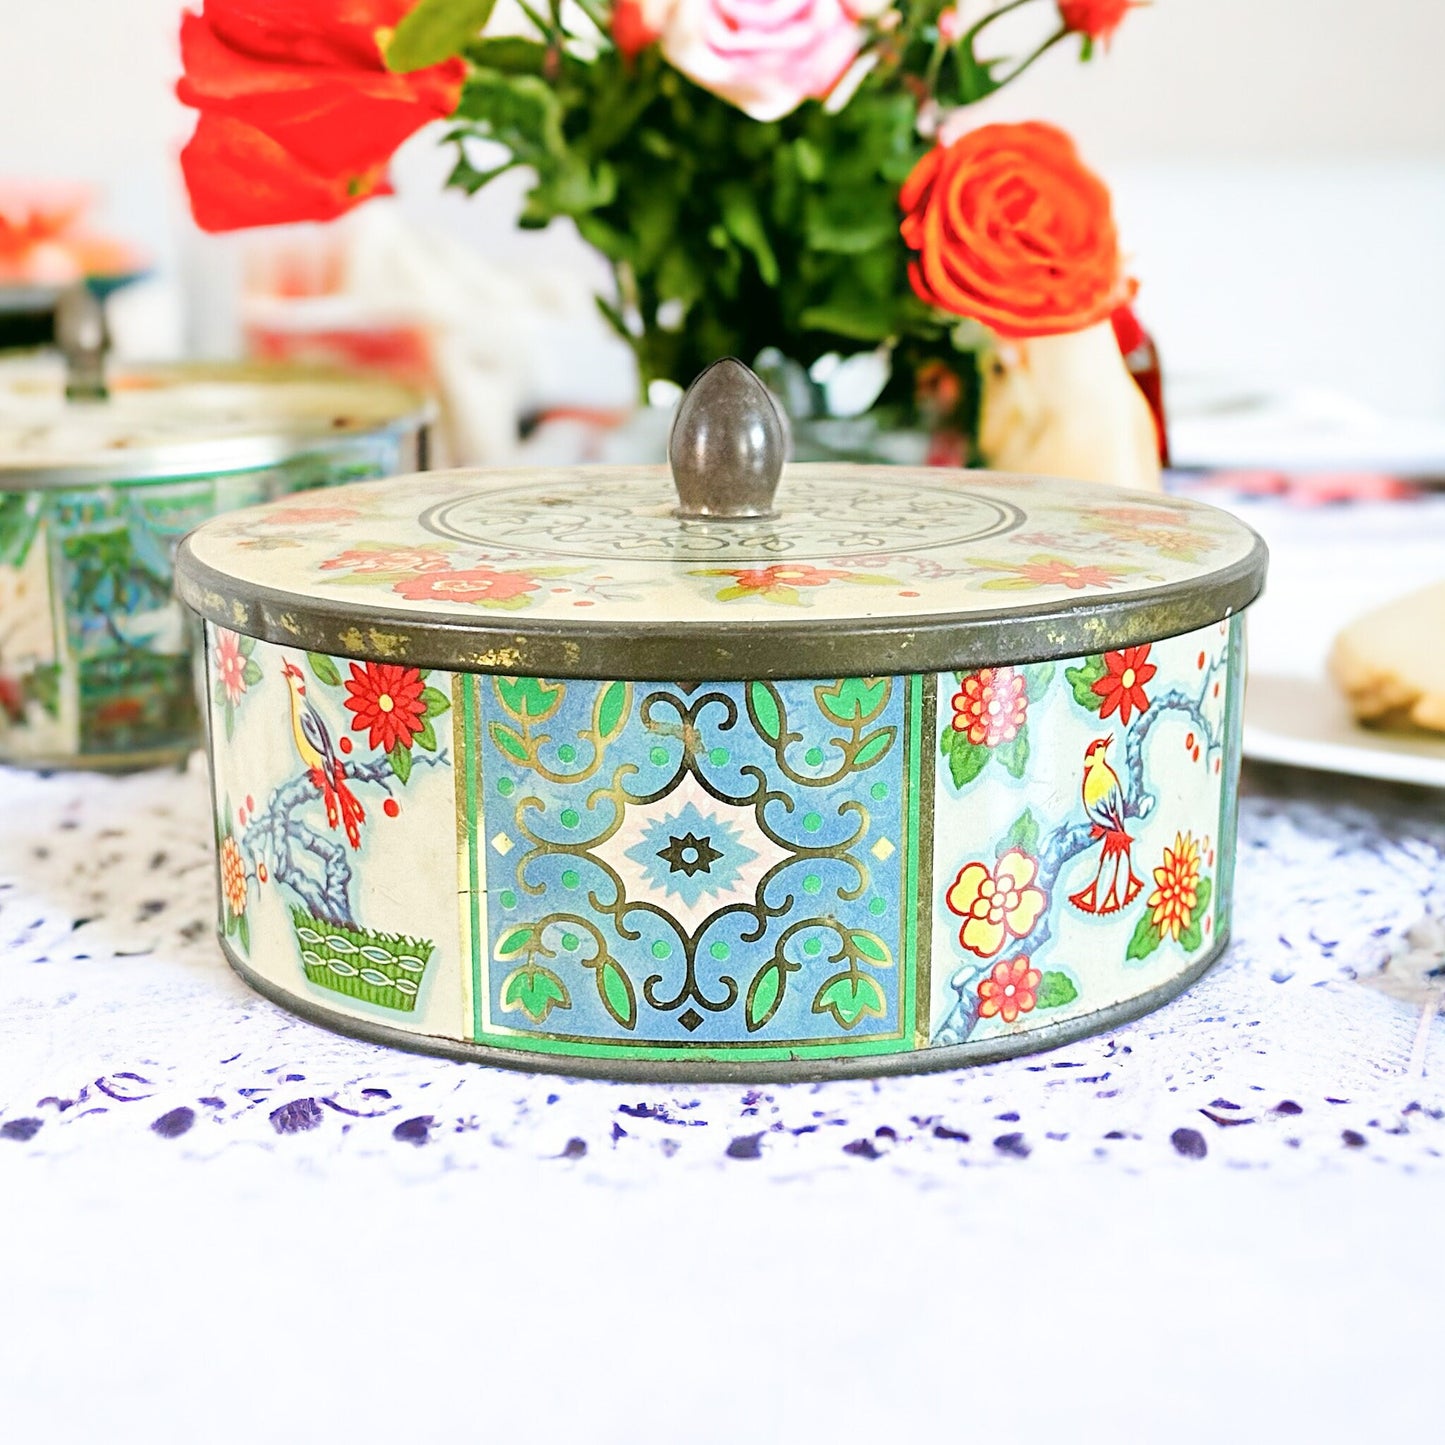 Scented Candle in Vintage Biscuit Tin